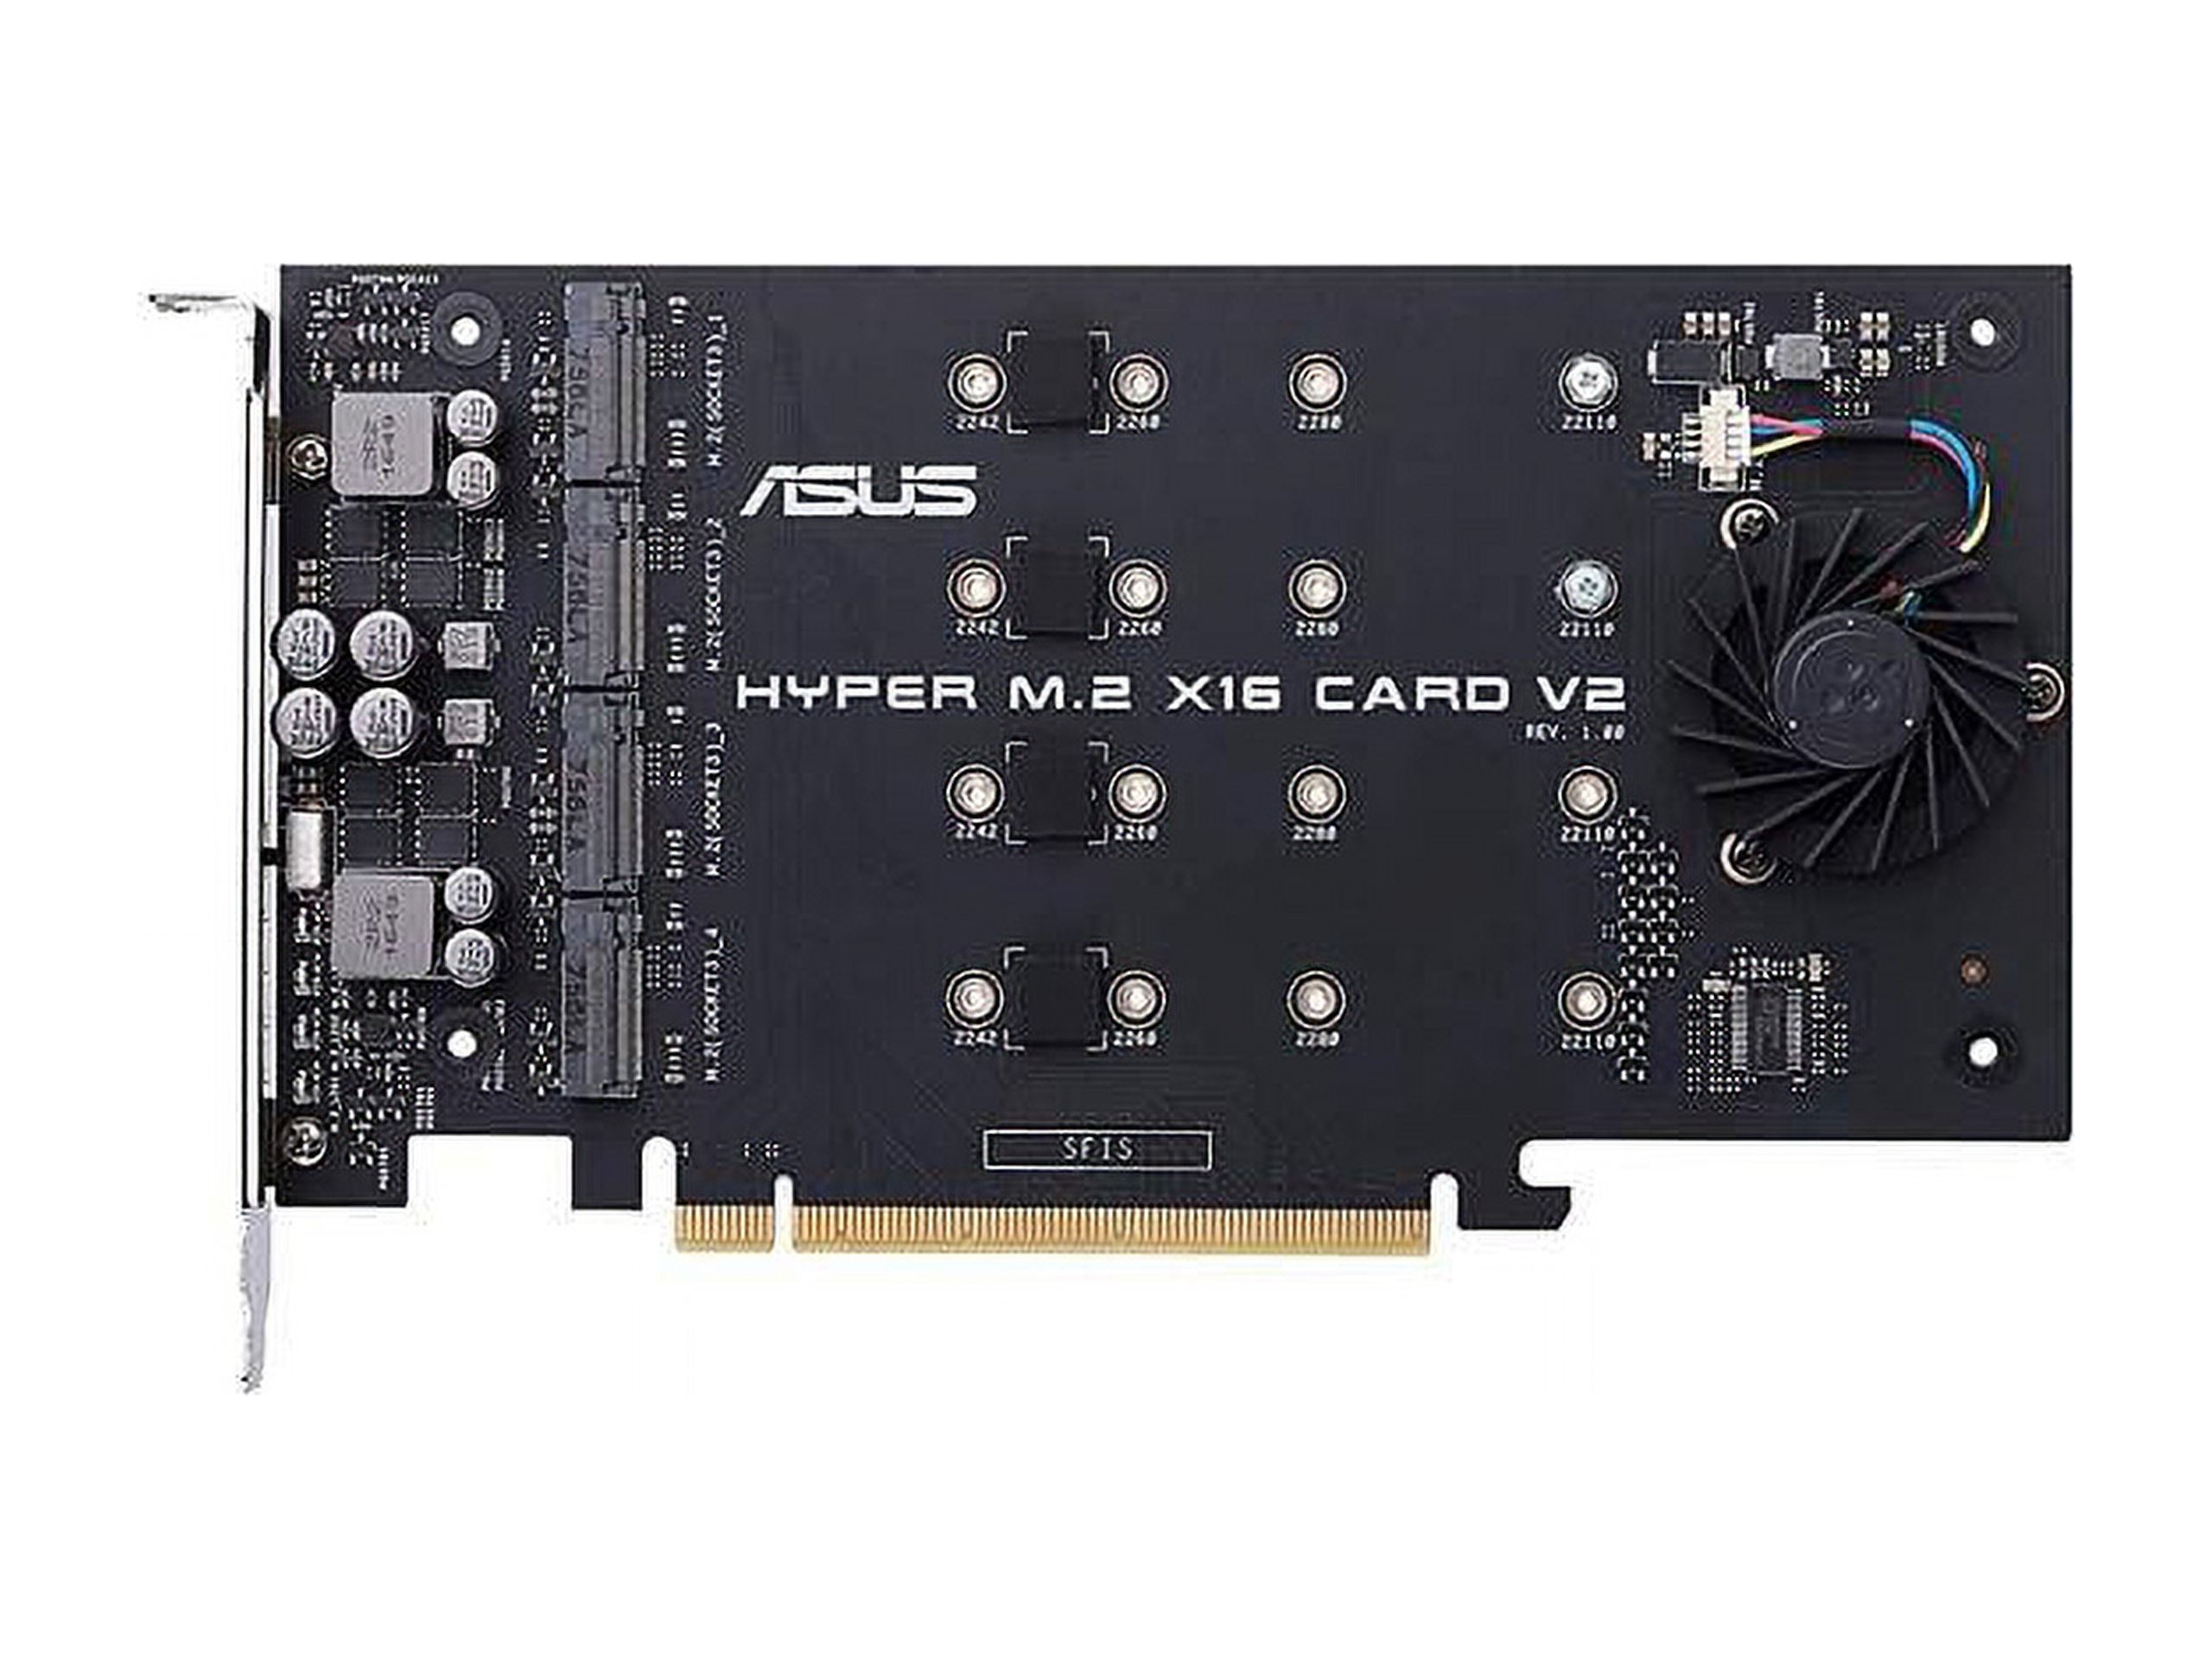 ASUS Hyper M.2 x16 PCIe 3.0 x4 Expansion Card V2 Supports 4 x NVMe M.2 (2242/2260/2280/22110) Up to 128 Gbps for Intel VROC and AMD Ryzen Threadripper NVMe RAID - image 4 of 5